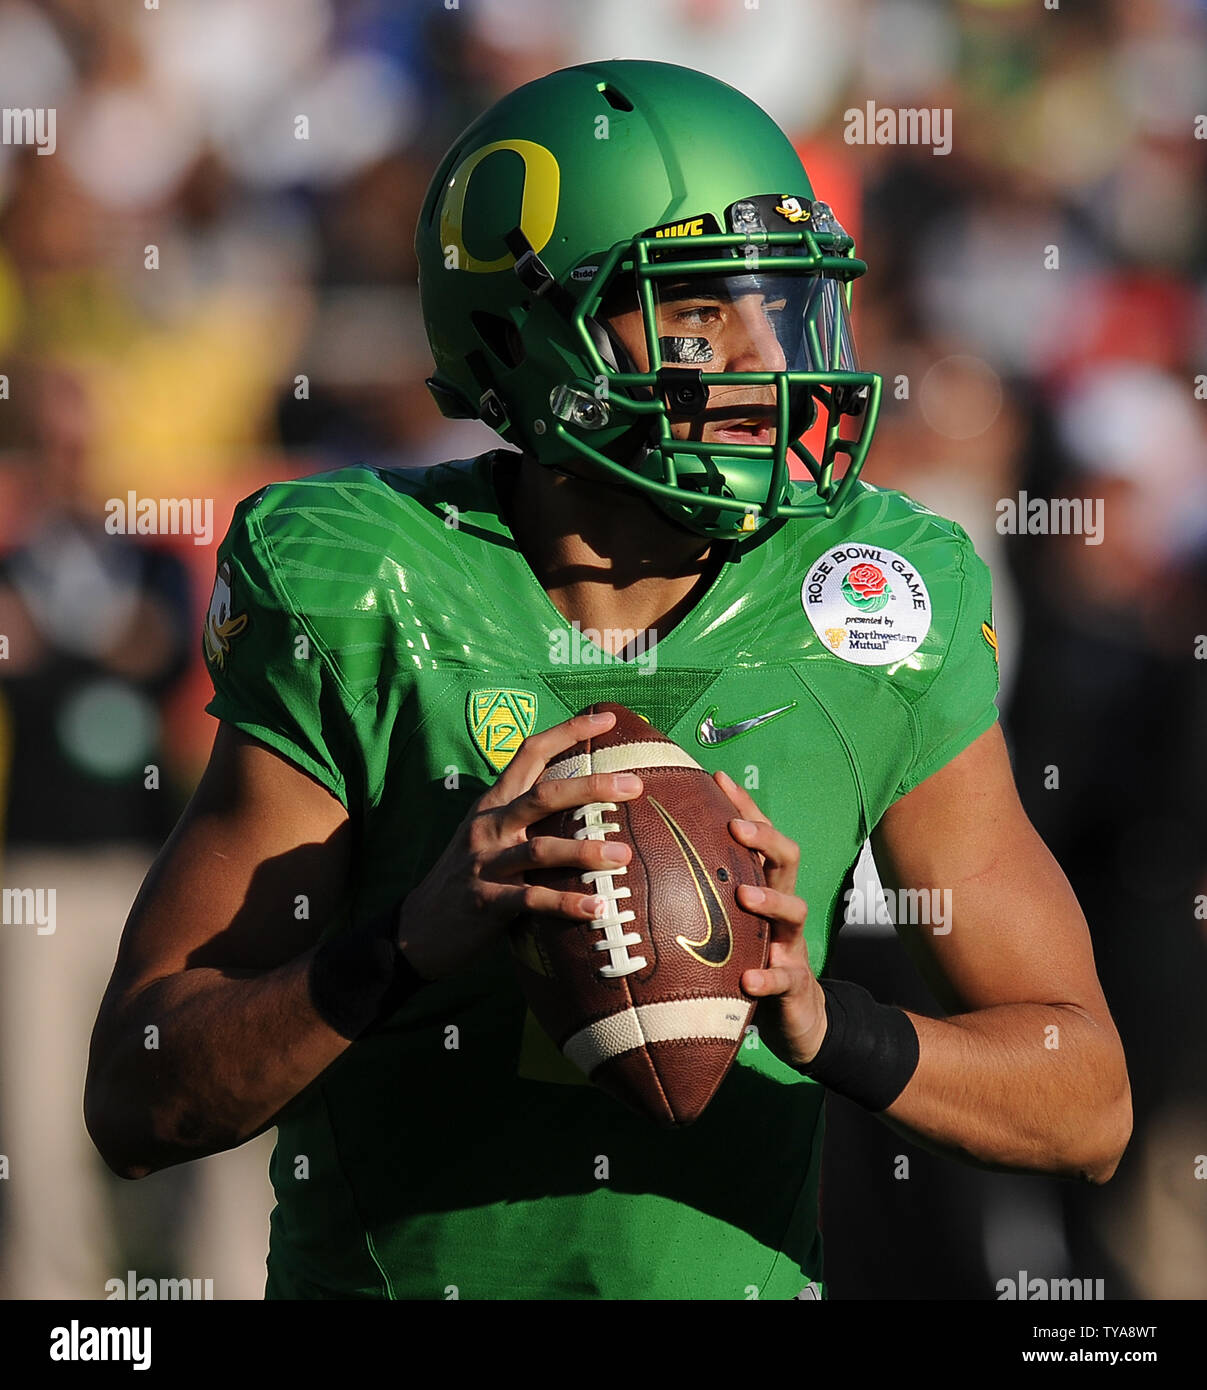 Oregon Ducks quarterback Marcus Mariota (8) drops back to pass in the first  quarter against the Florida State Seminoles at the College Football Playoff  Semifinal of the Rose Bowl in Pasadena, California